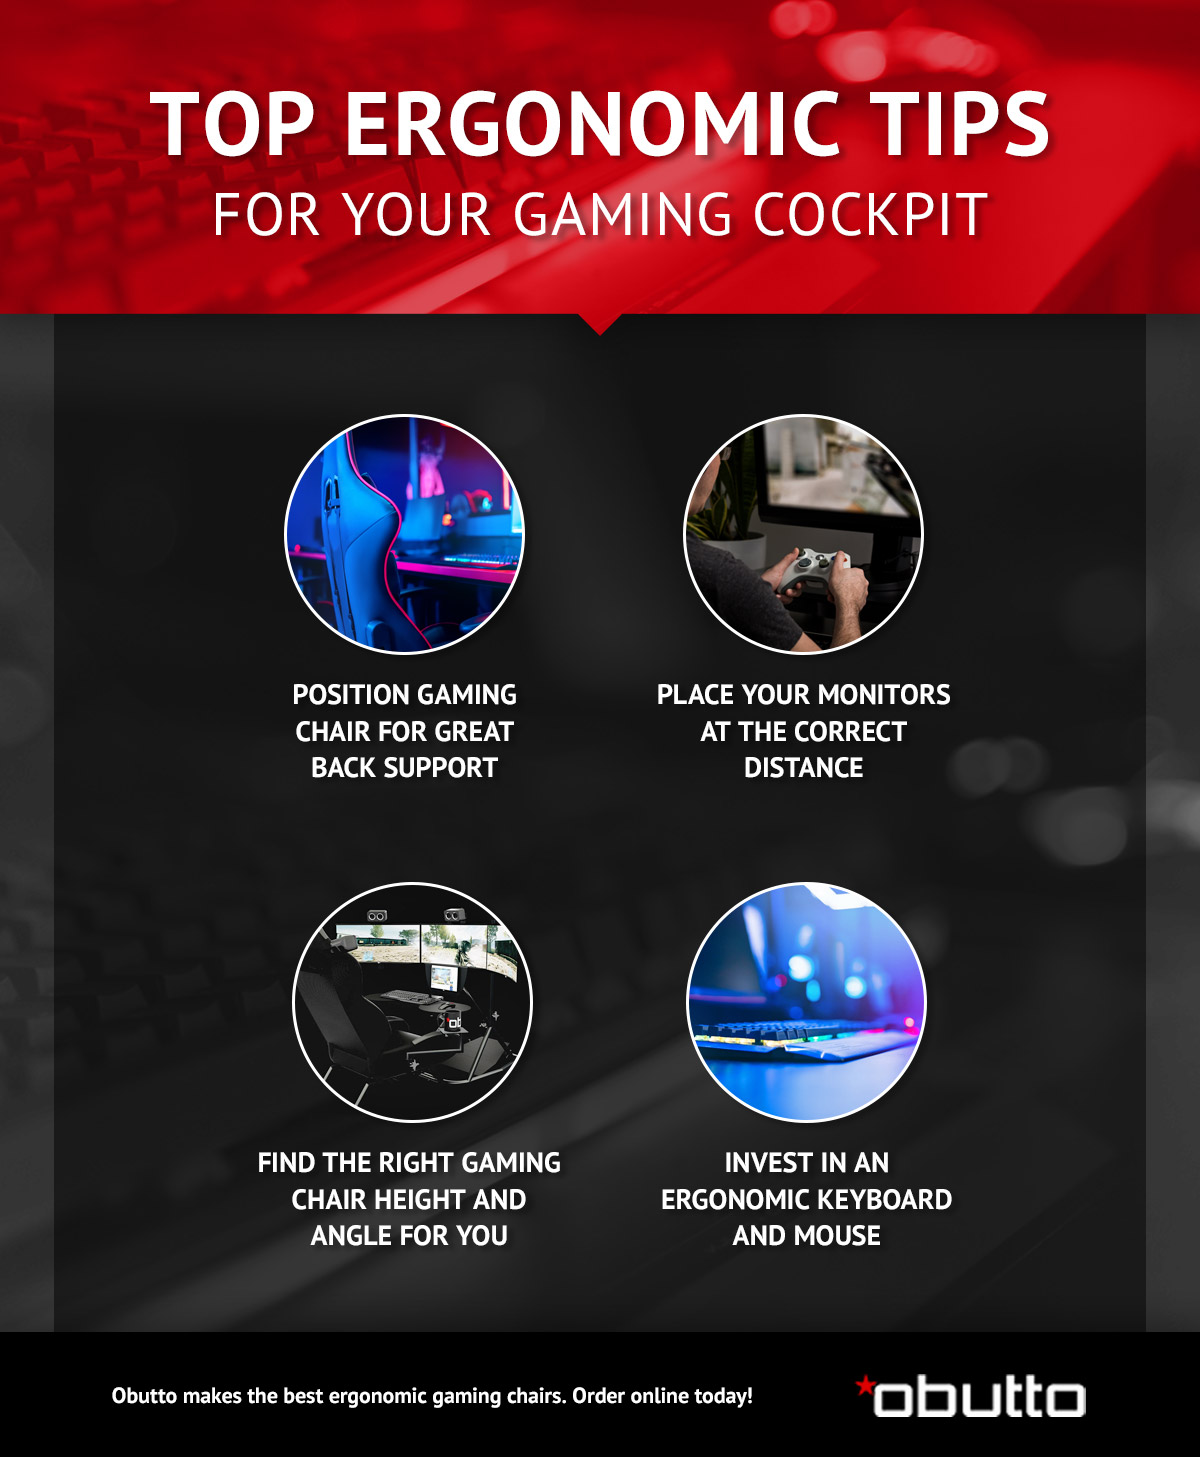 Top Ergonomic Tips for your Gaming Cockpit infographic 